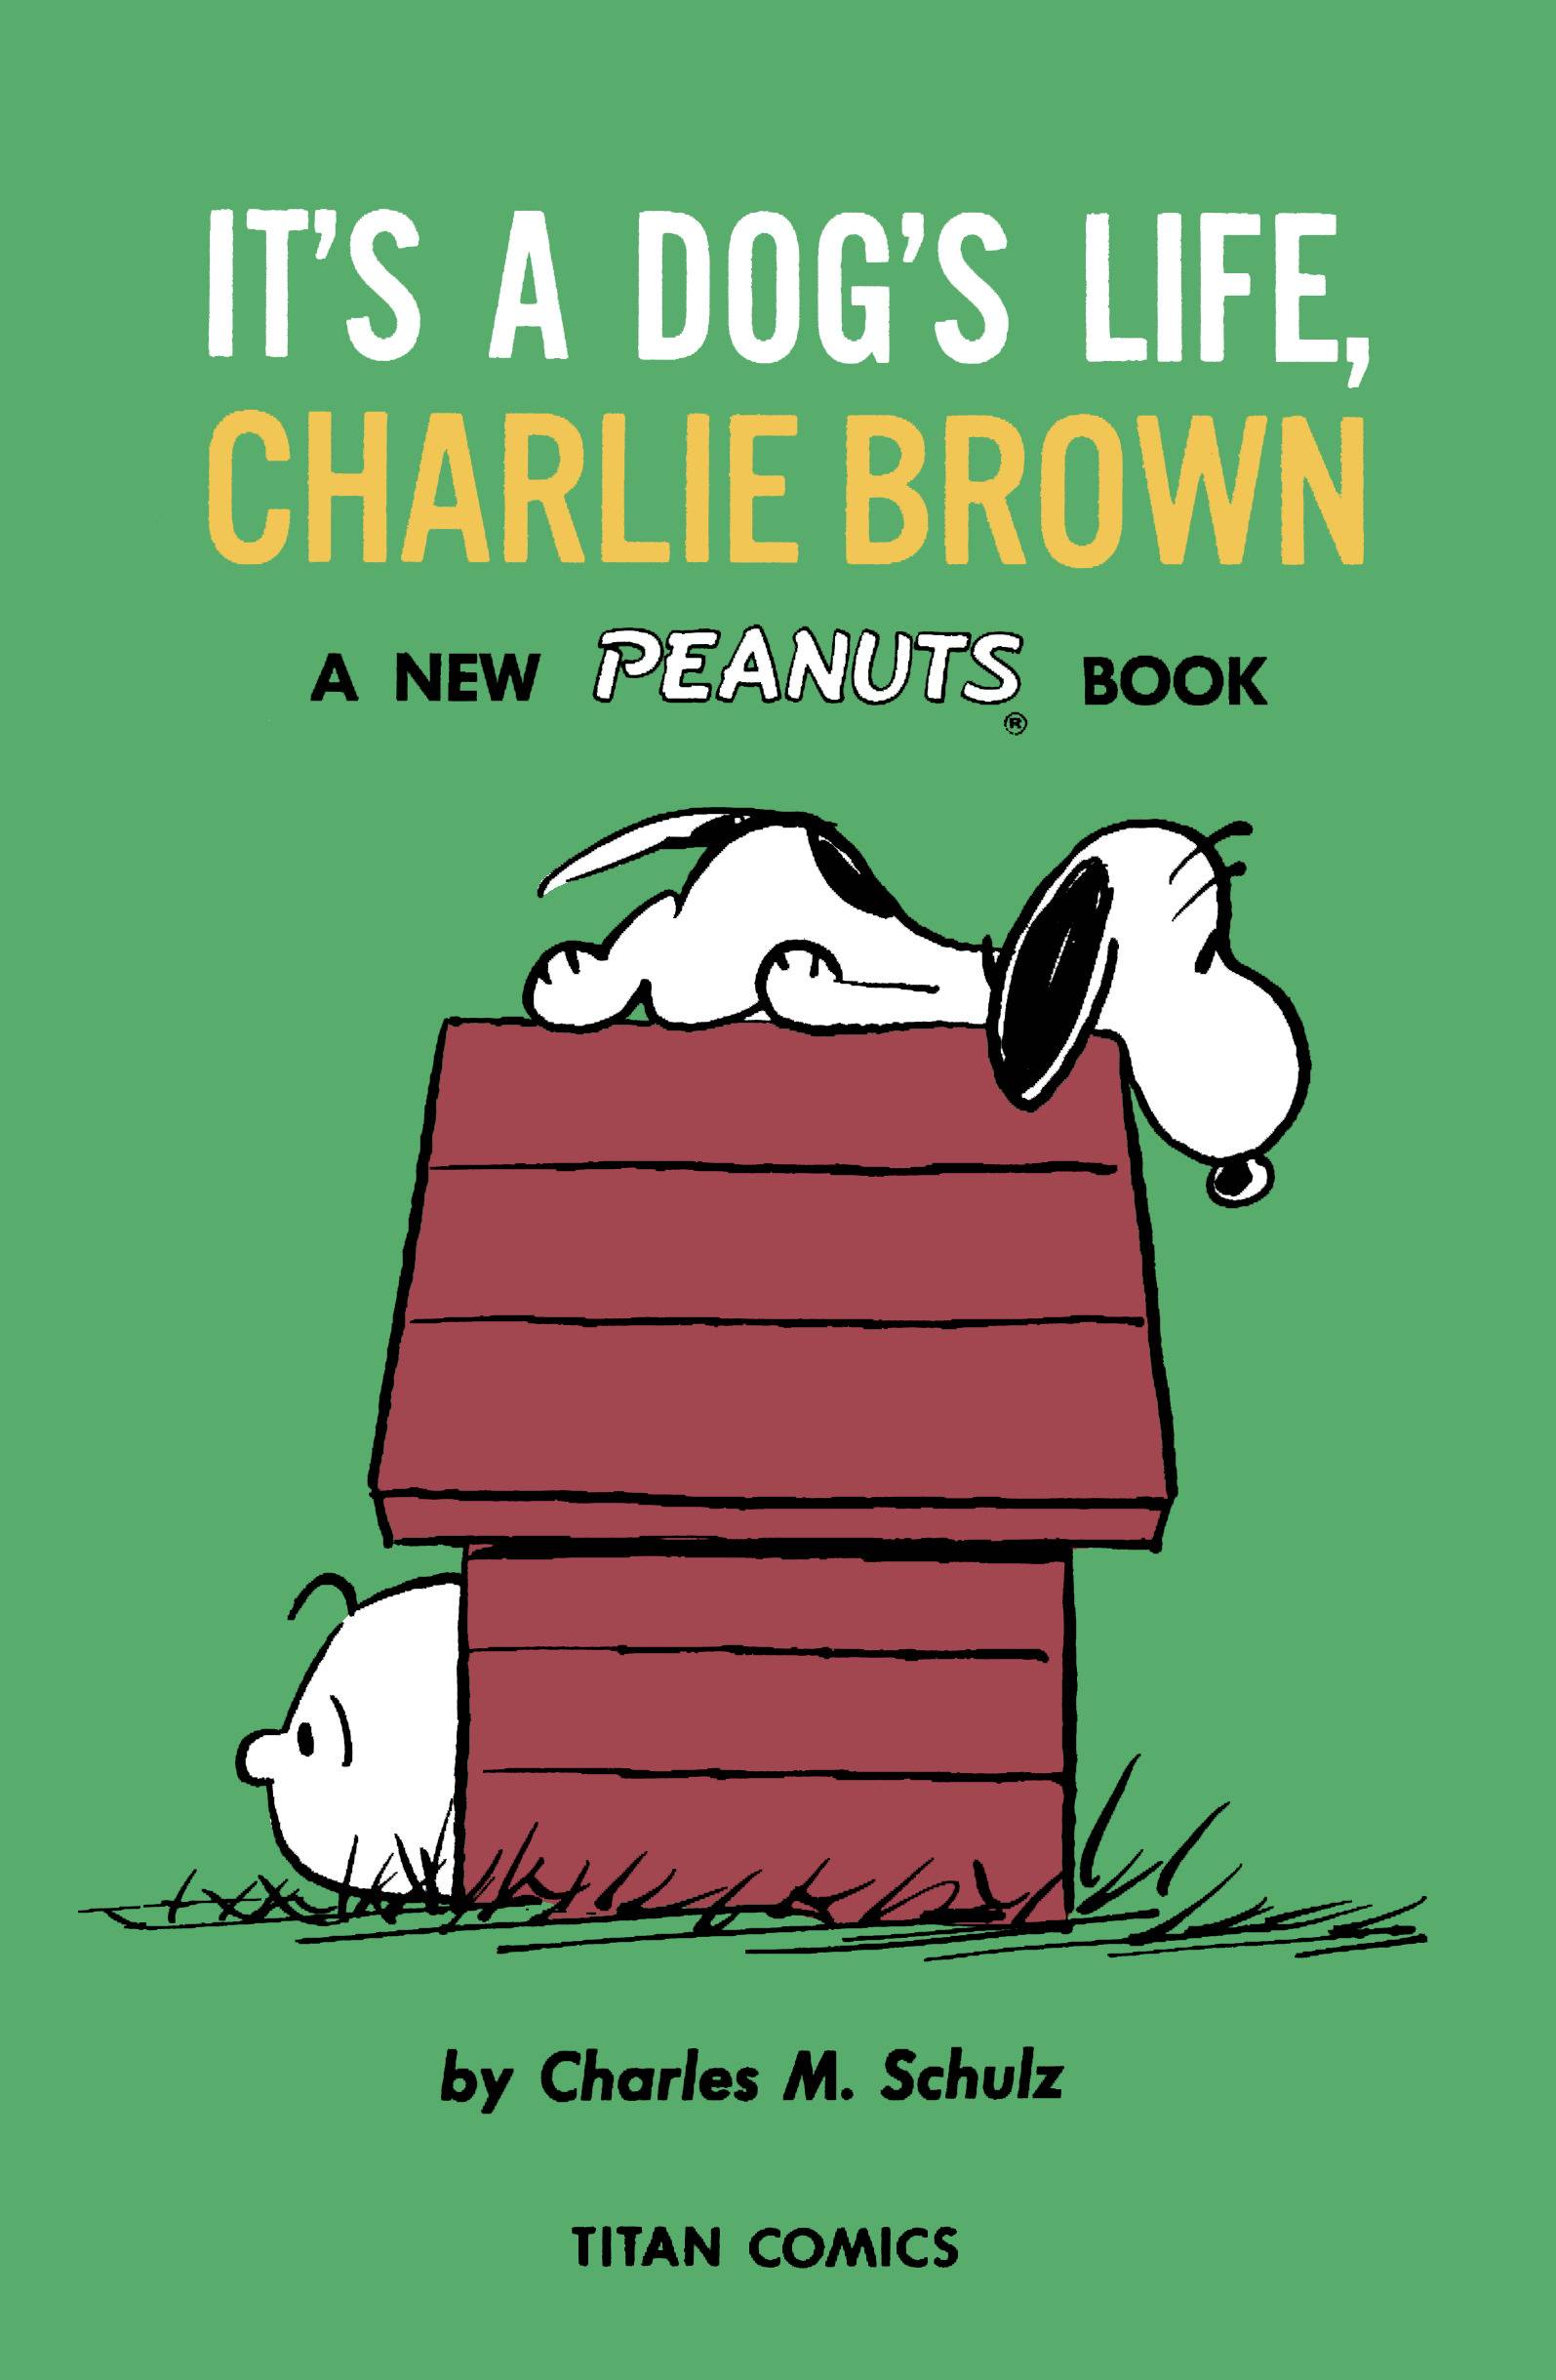 PEANUTS TP ITS A DOGS LIFE CHARLIE BROWN 1960 - 1962 (C: 0-1